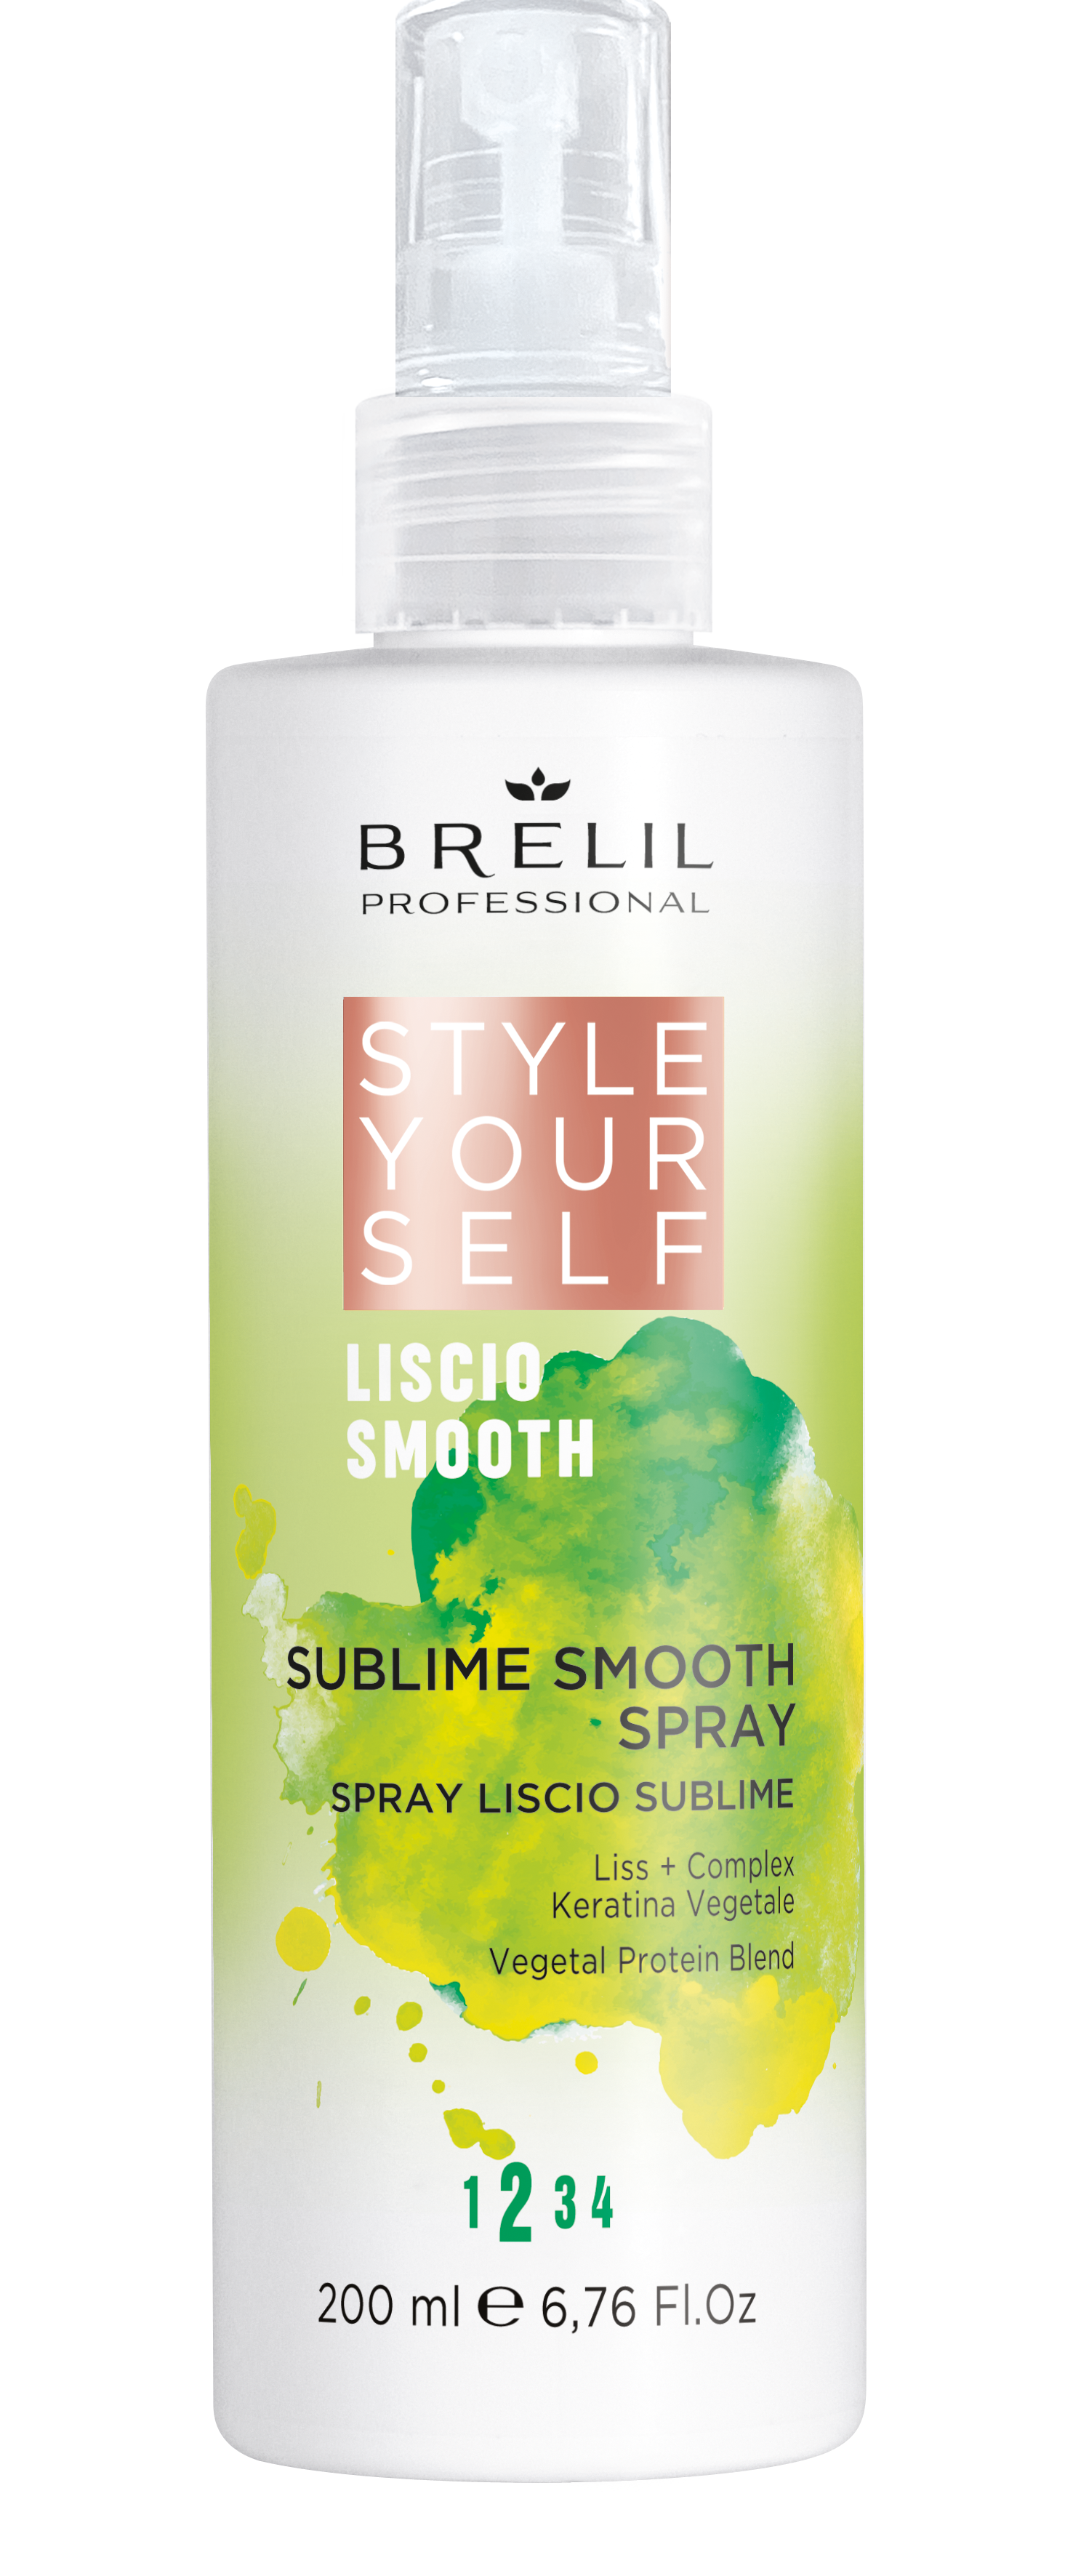 STYLE YOURSELF SUBLIME SMOOTH SPRAY